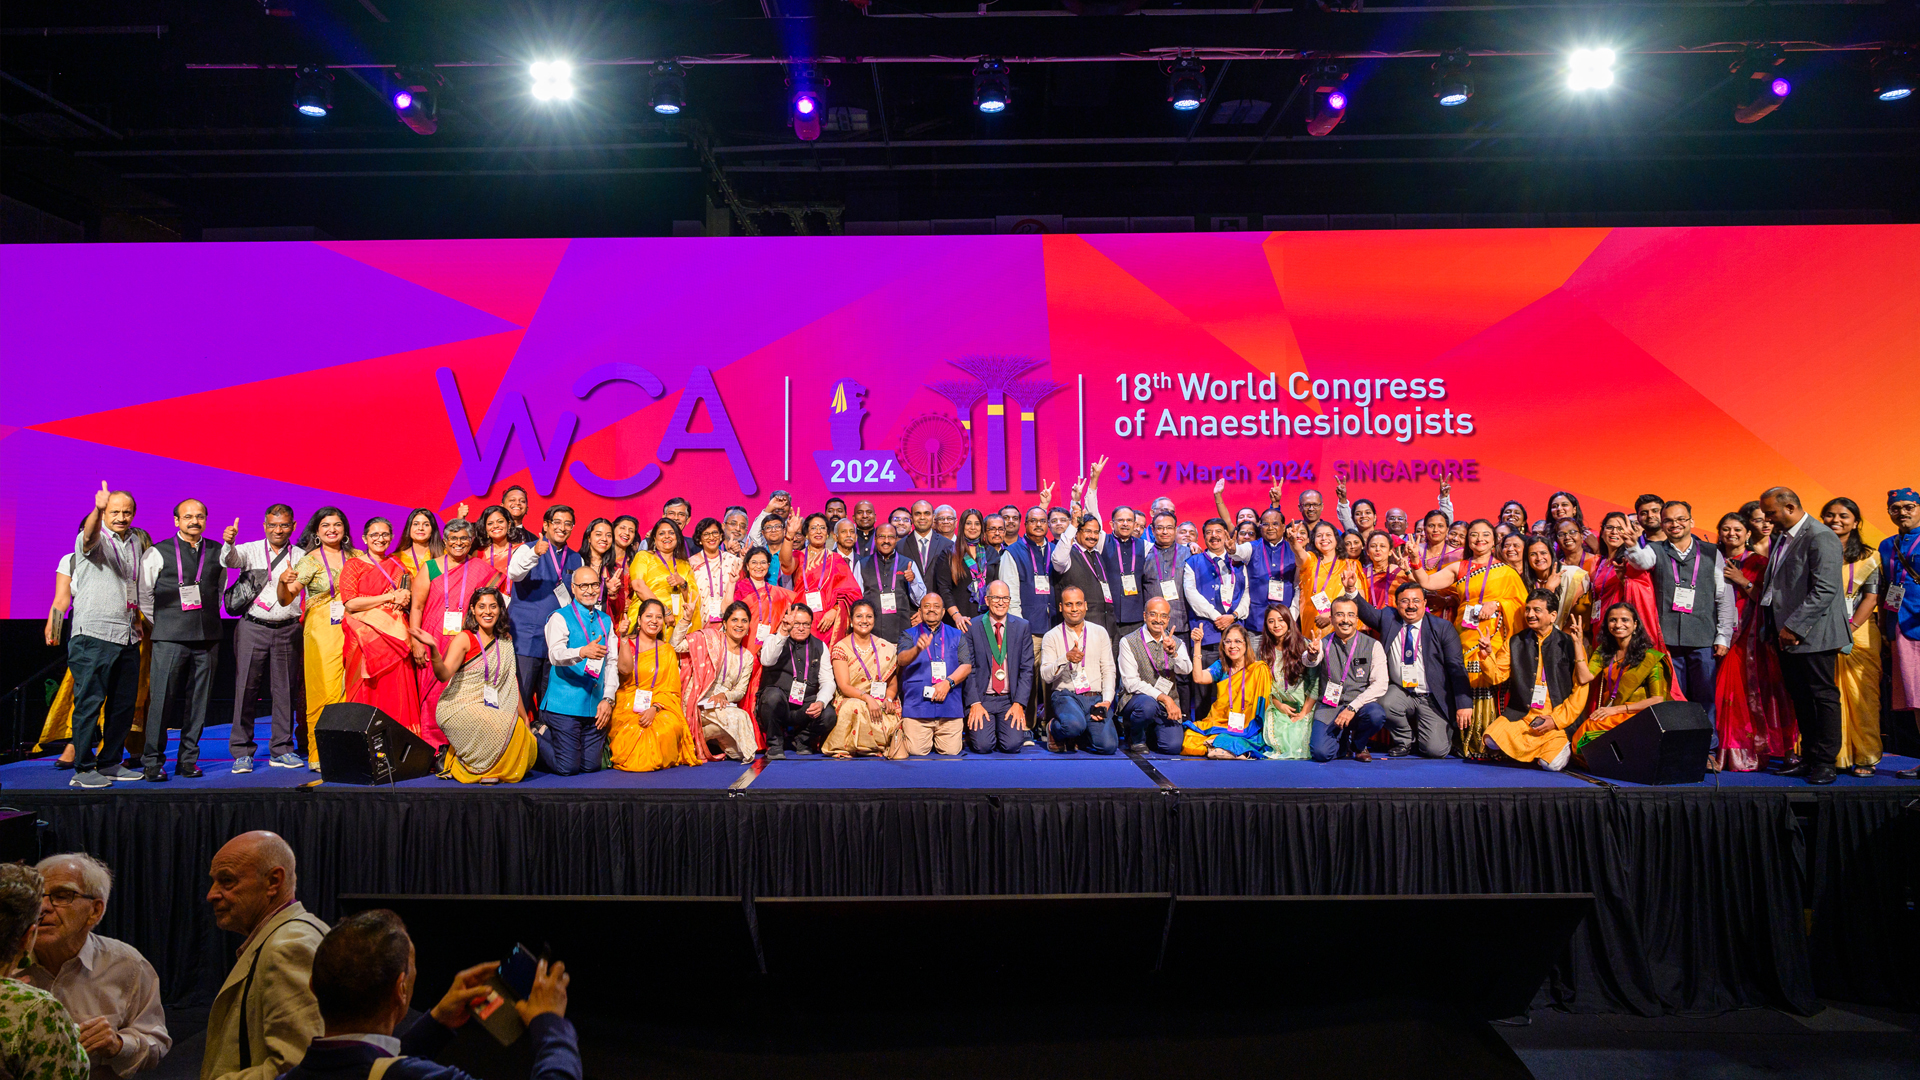 Highlights from the 18th World Congress of Anaesthesiologistsbackground Image